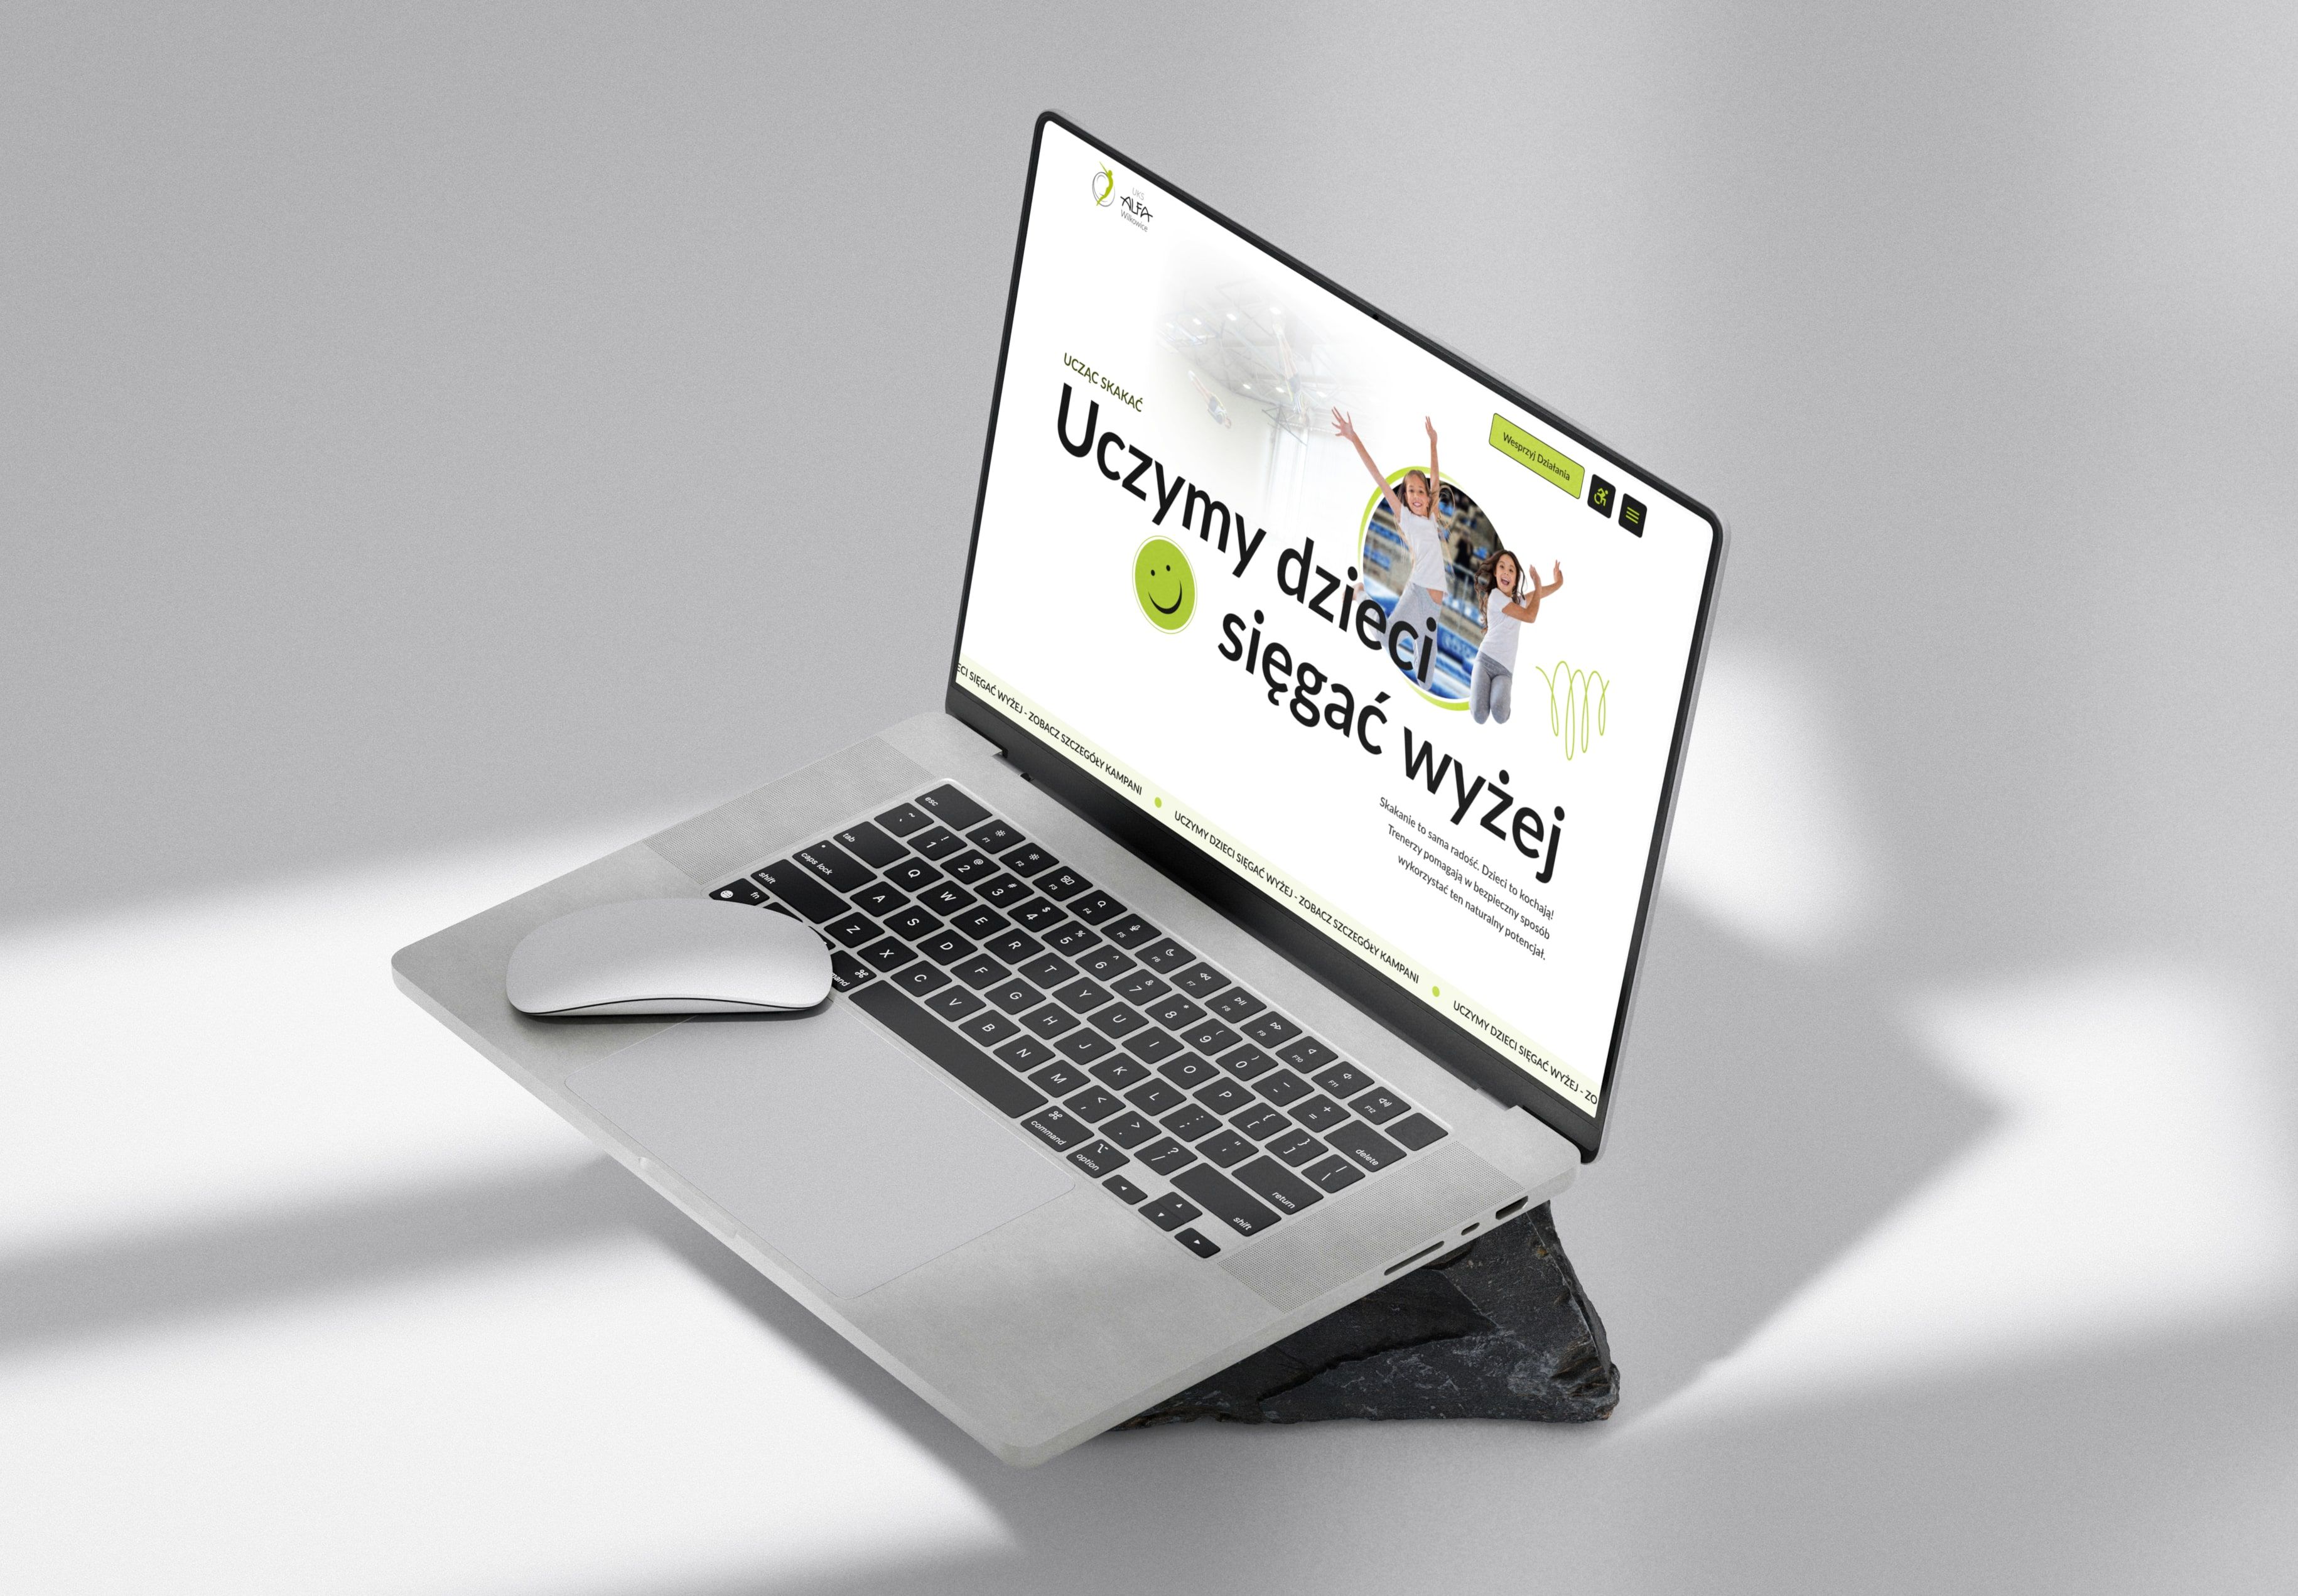 Home Page Banner Mockup on laptop view:  By teaching trampoline jumping - we teach children to achieve more